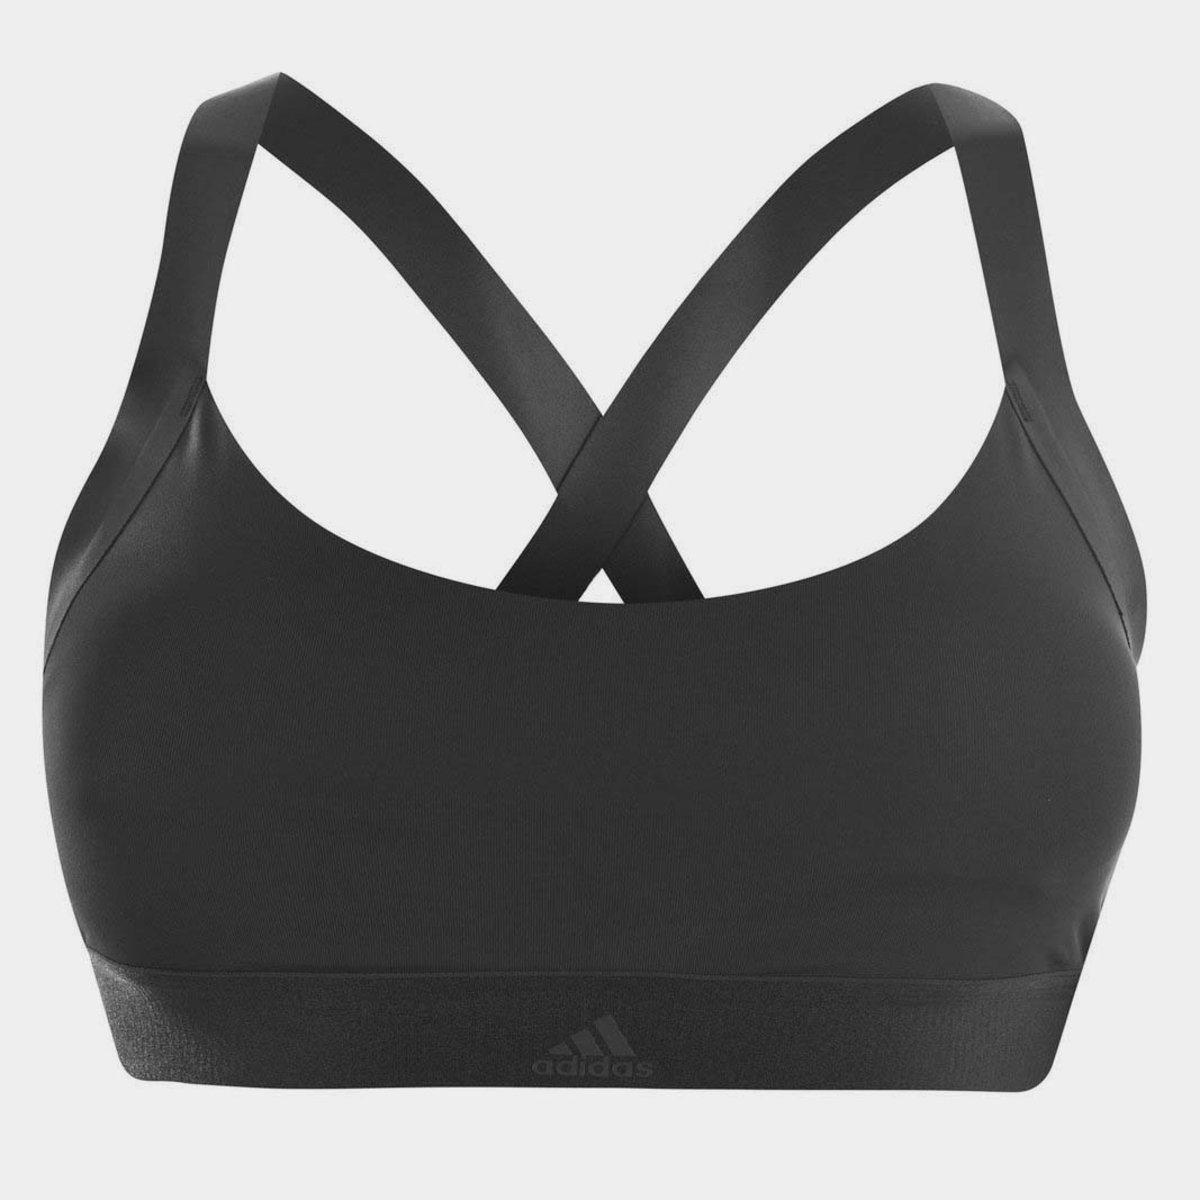 PUMA Womens Seamless Black Sports Bra with Removable Cups Plus Size 1X